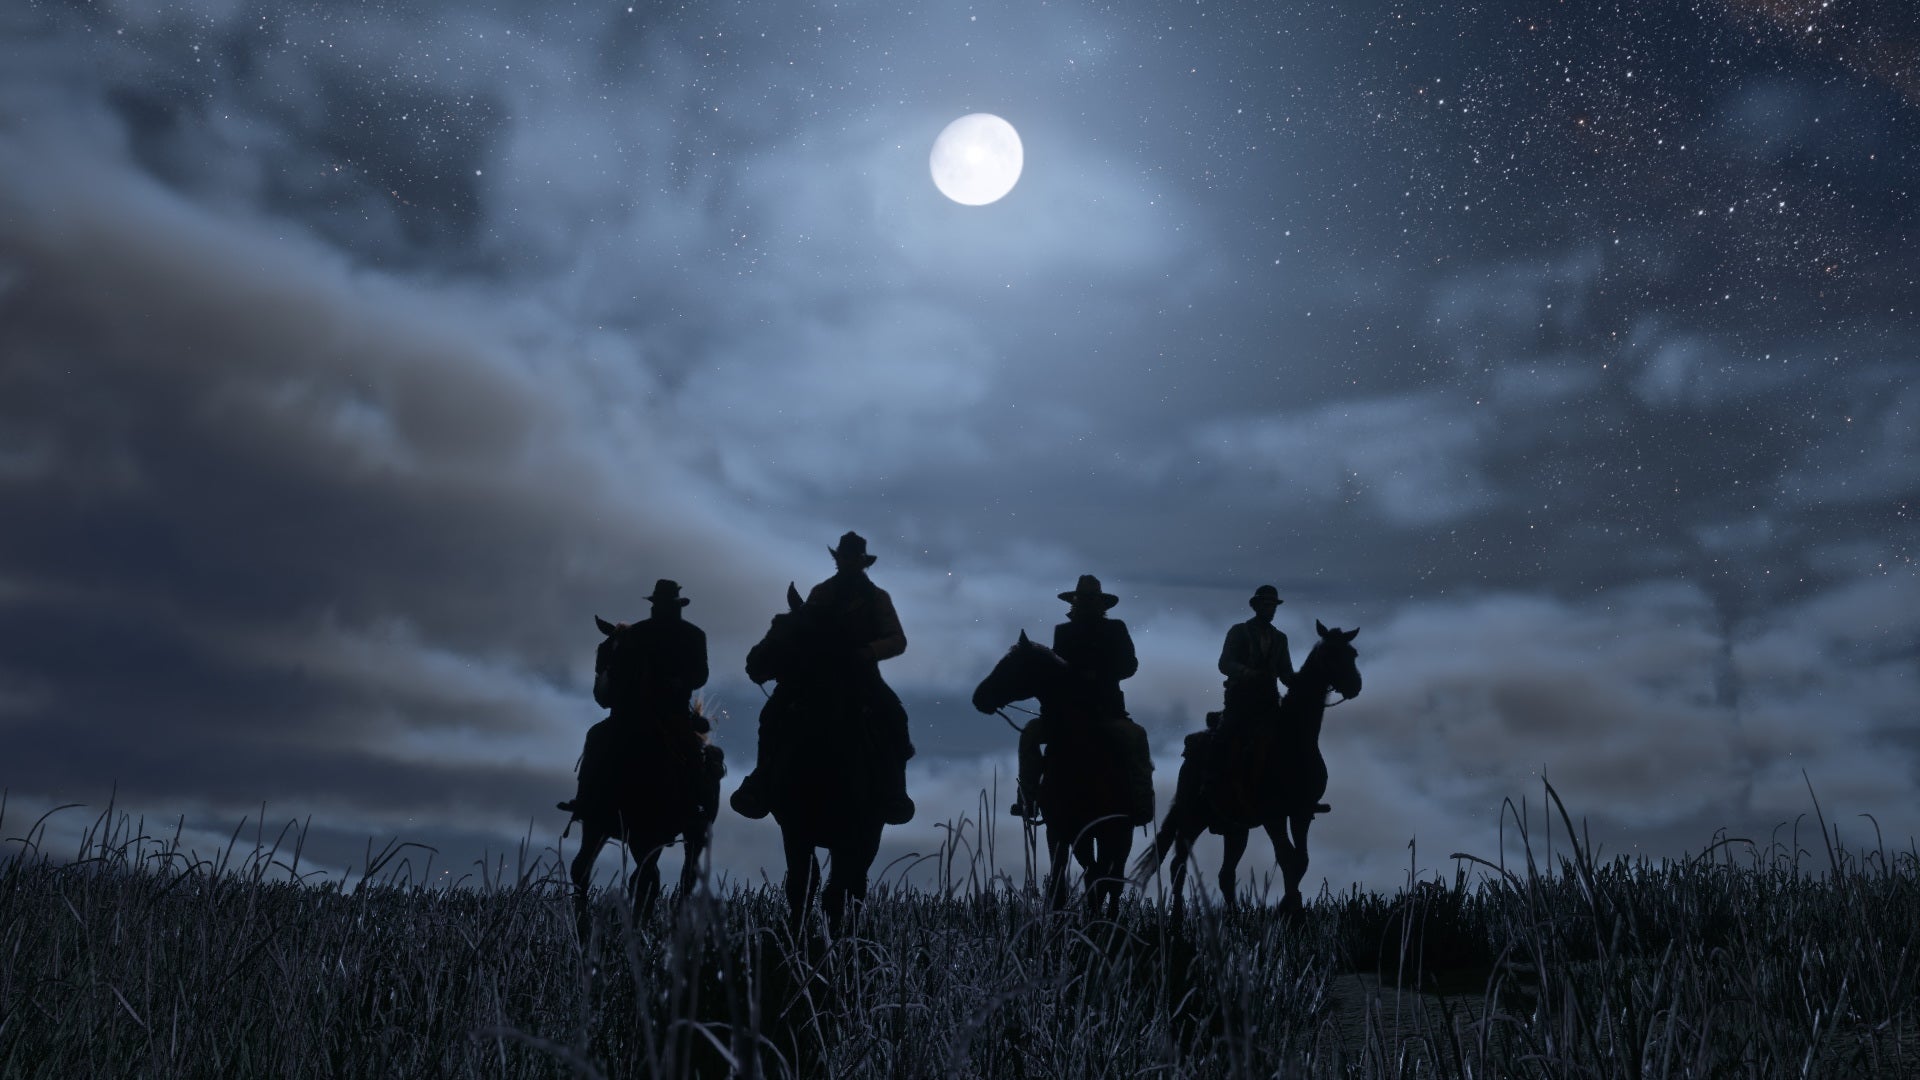 Image for Red Dead Redemption 2 fans are already mapping the game